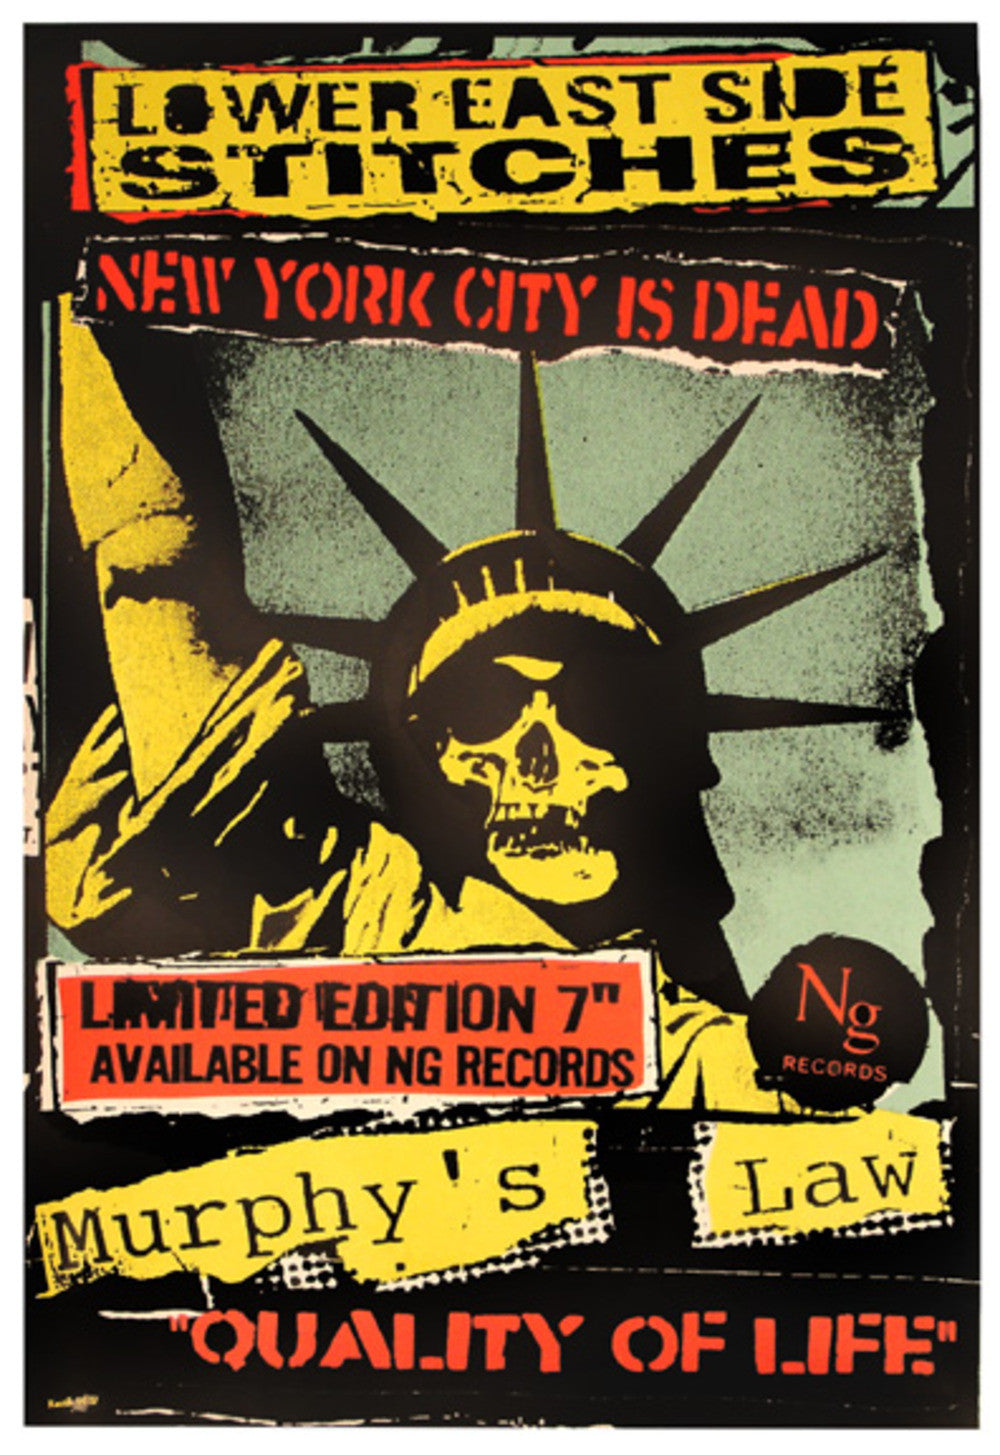 Frank Kozik -1999 - Lower East Side Stitches Poster